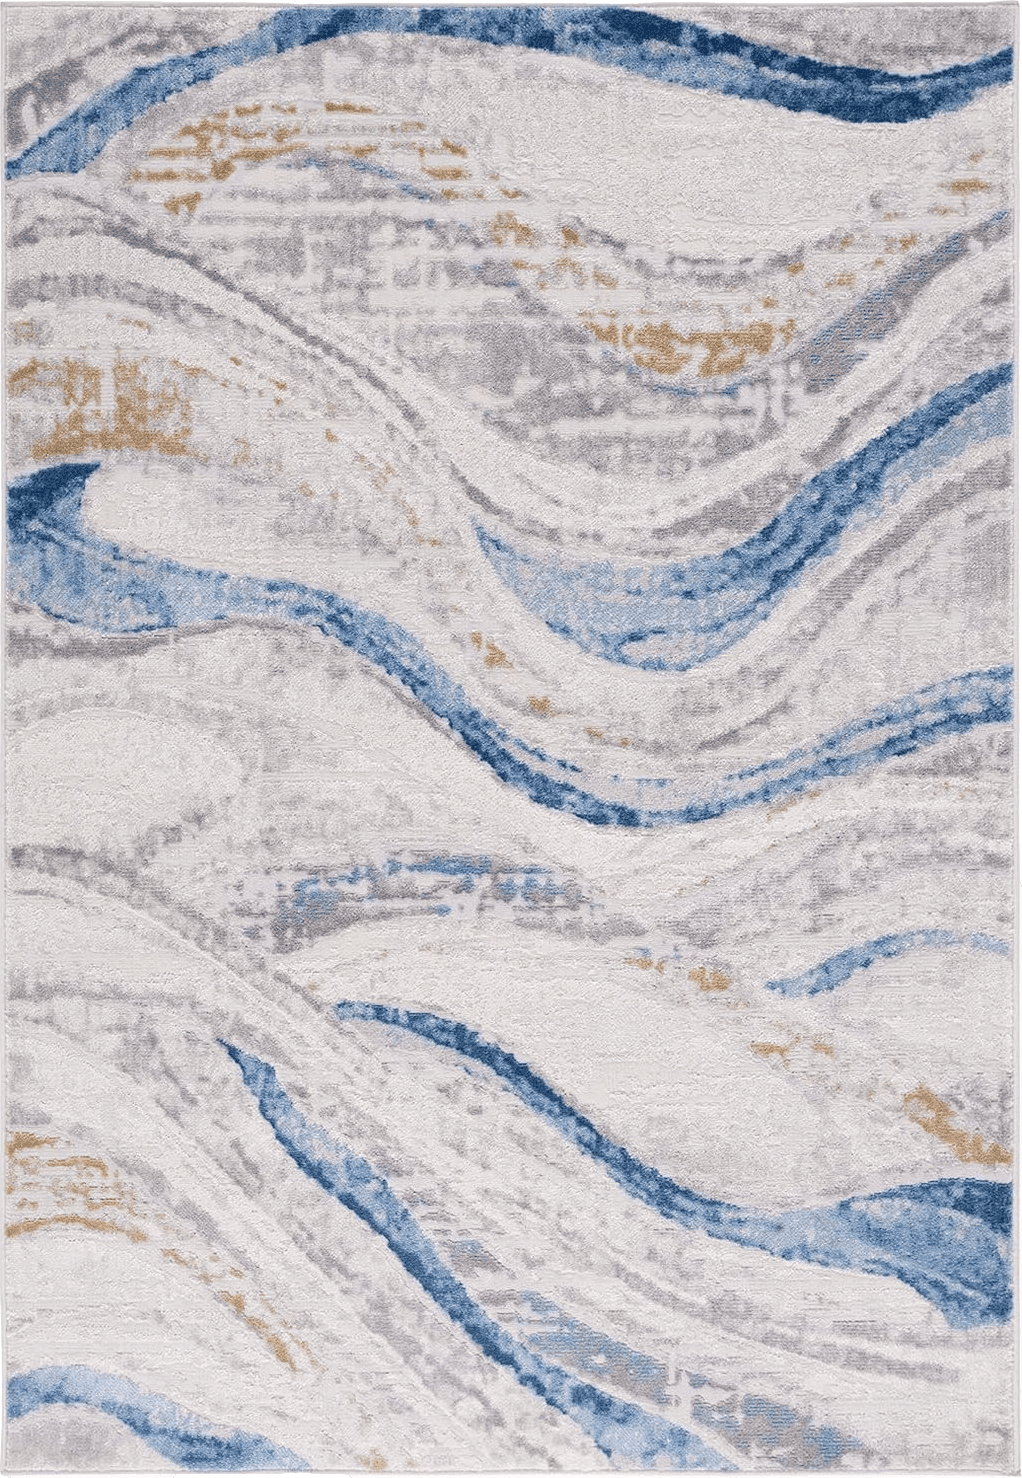 9x12 Safavieh Palma Collection Area Rug - 9' x 12', Beige & Light Blue, Modern Abstract Design, Non-Shedding & Easy Care, Ideal for High Traffic Areas in Living Room, Bedroom (PAM334A)